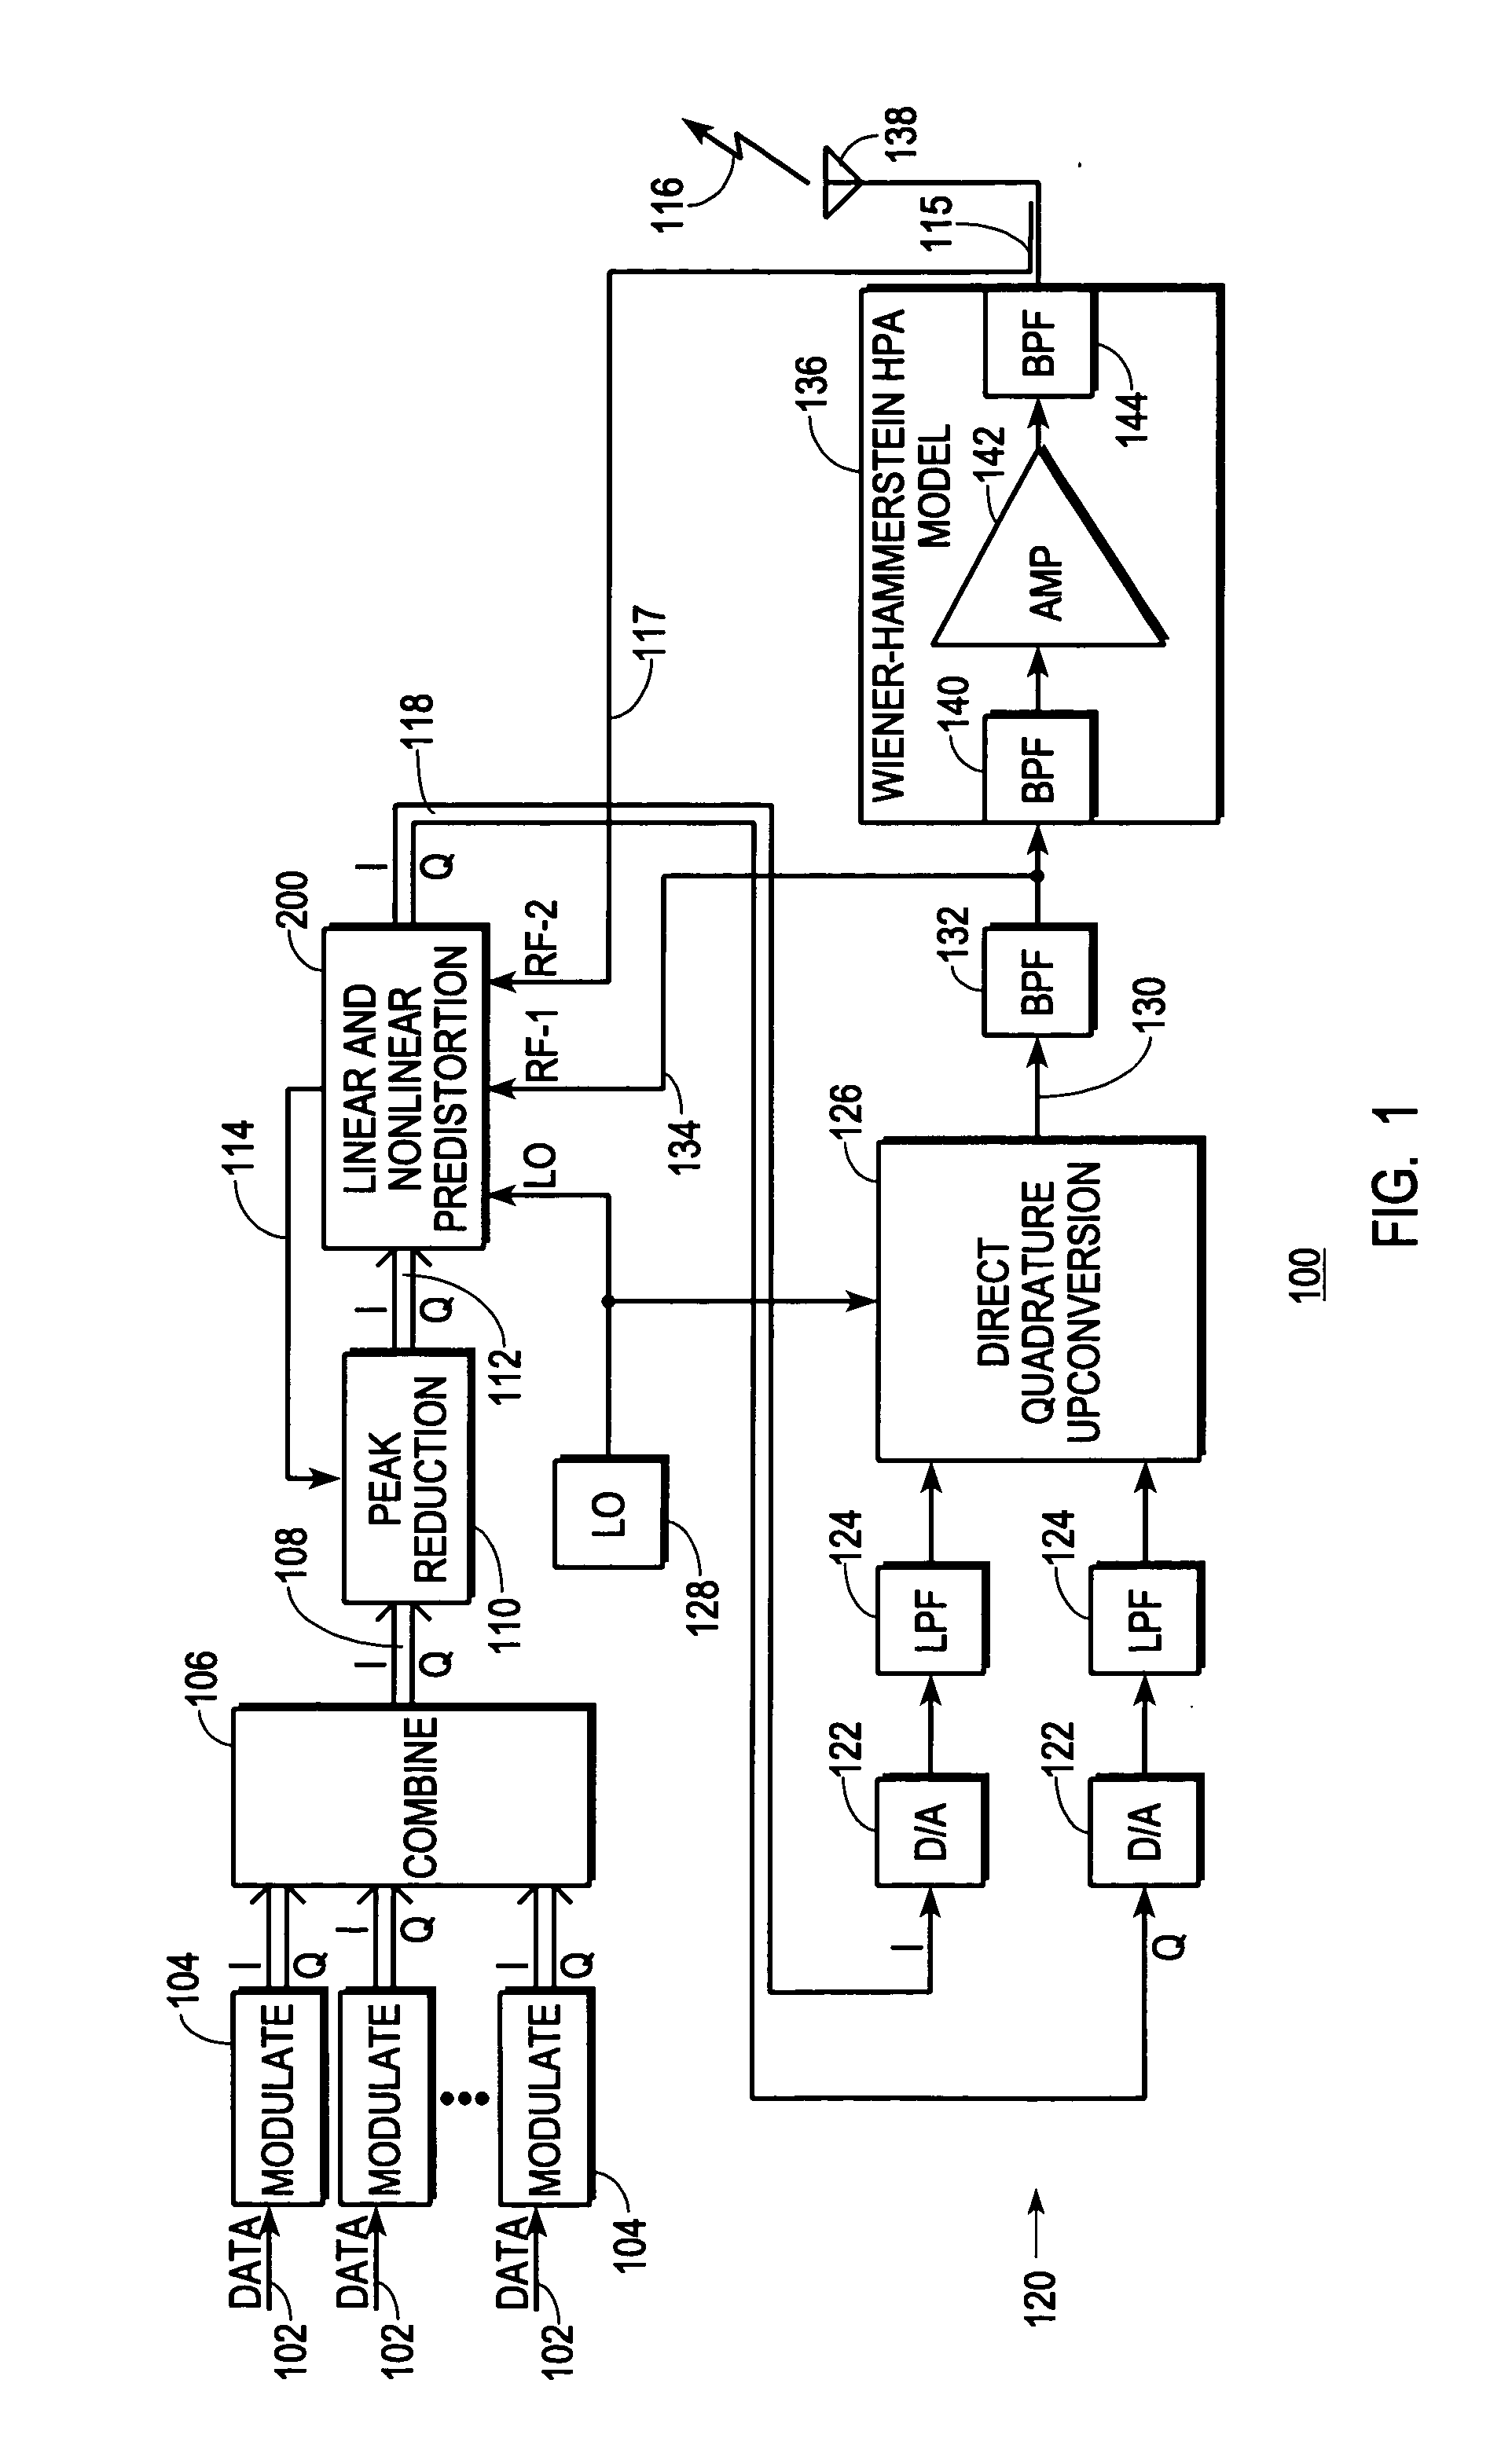 Predistortion circuit and method for compensating nonlinear distortion in a digital RF communications transmitter